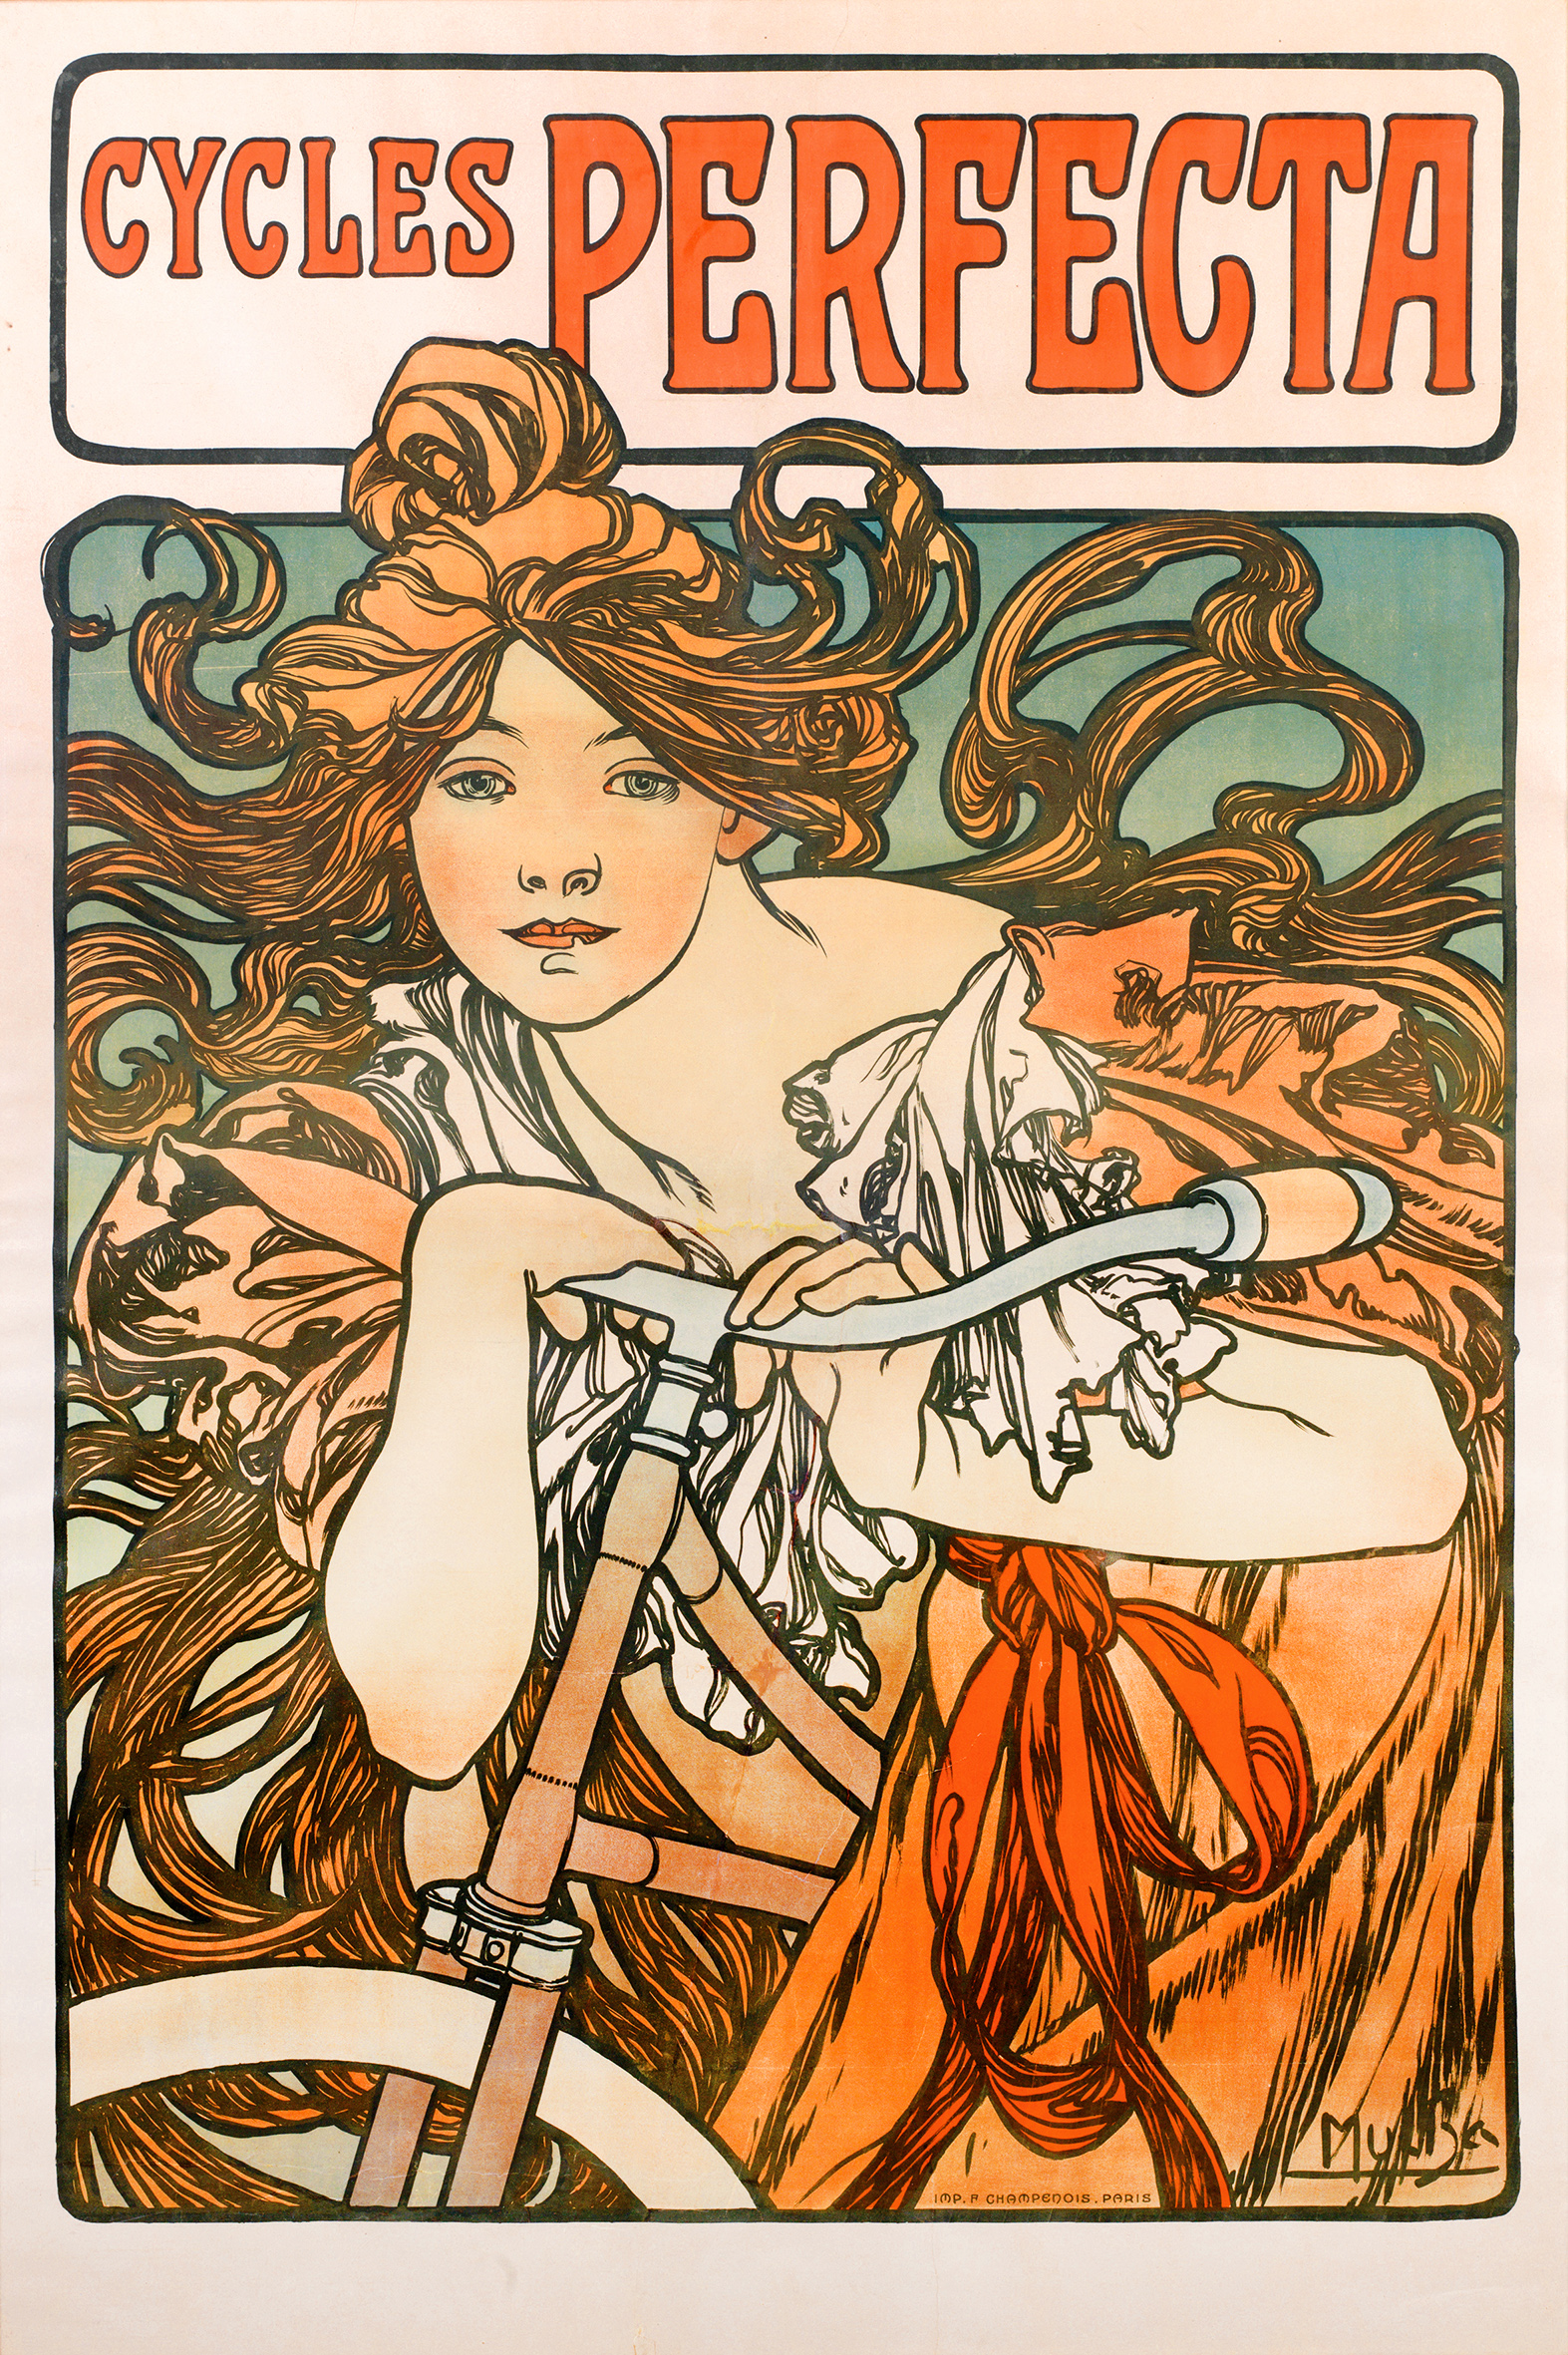 illustrational poster of a woman with long, flowing hair leaning on a bicycle